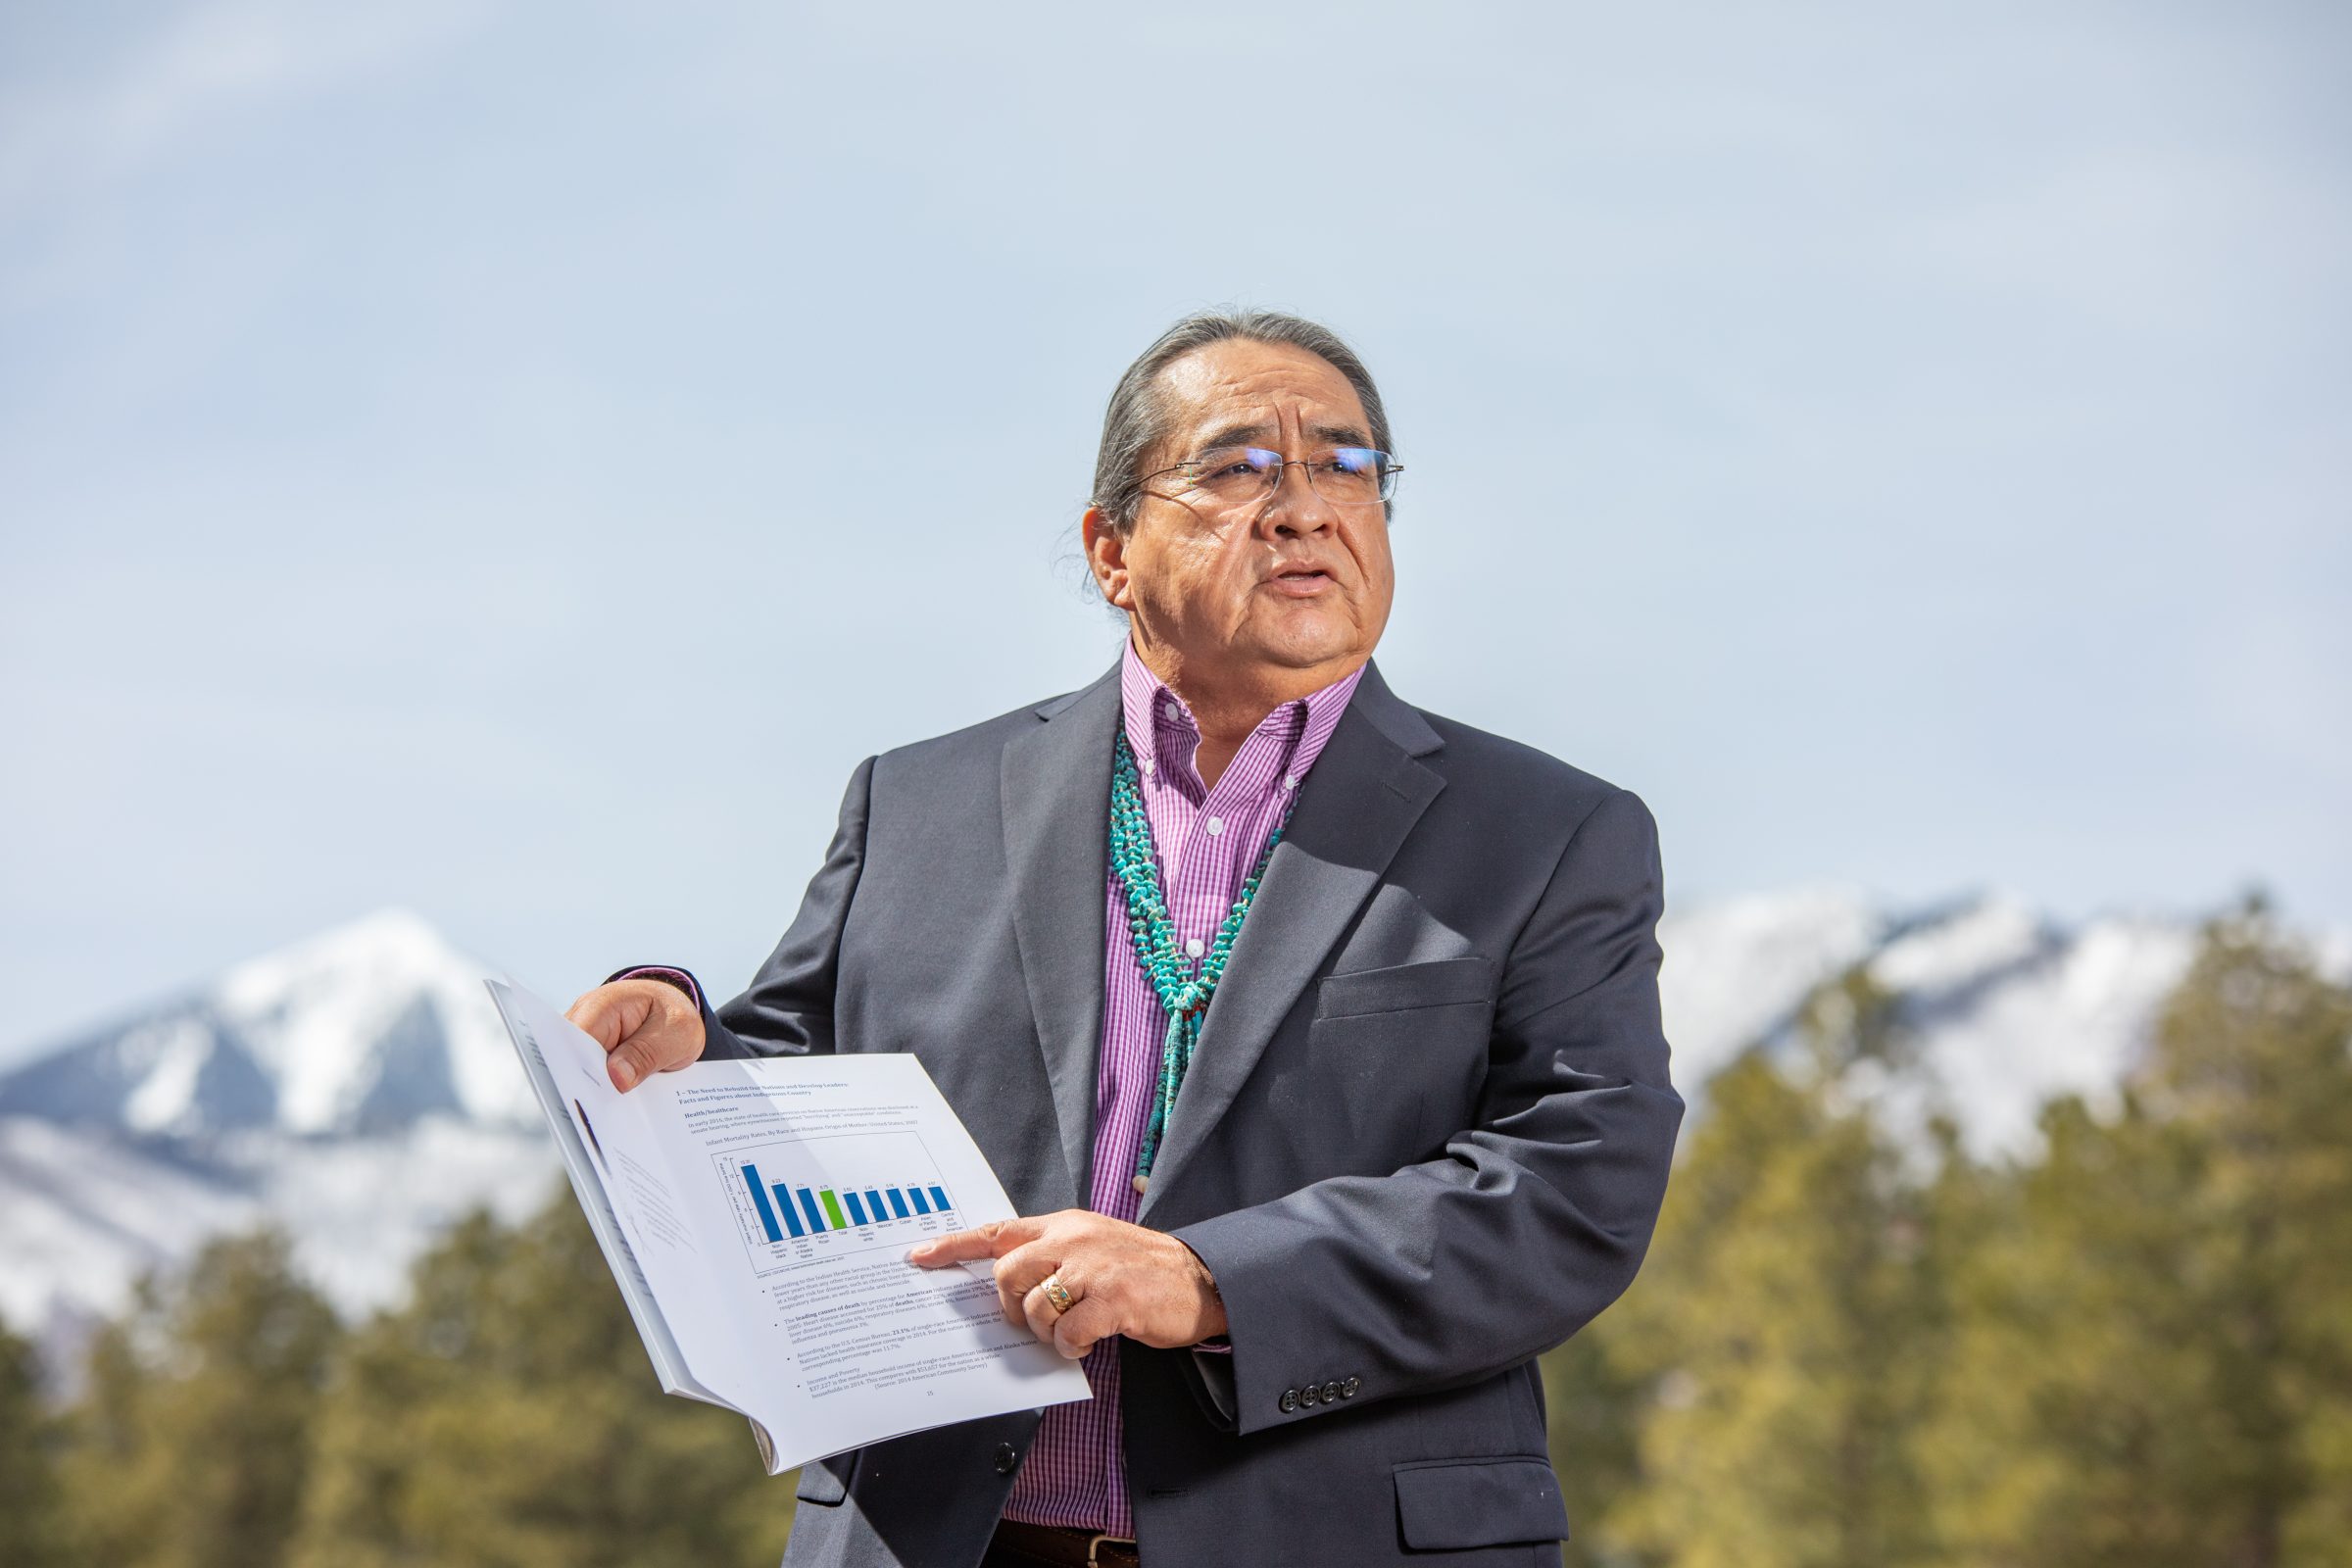 Manley Begay holds a chart and stands with mountain peaks behind him.